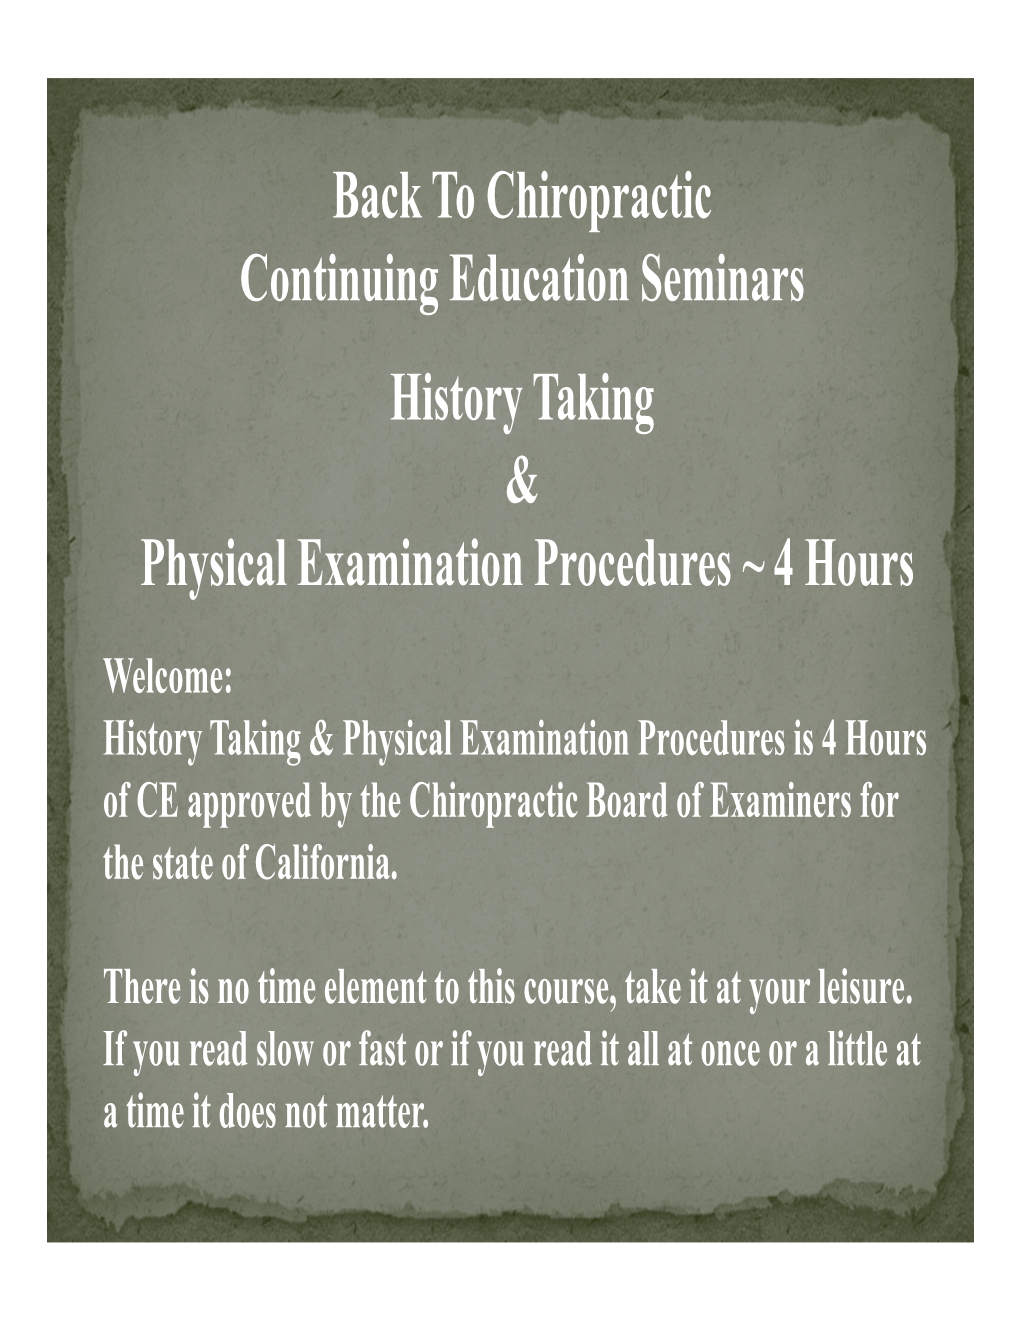 Back to Chiropractic Continuing Education Seminars History Taking & Physical Examination Procedures ~ 4 Hours